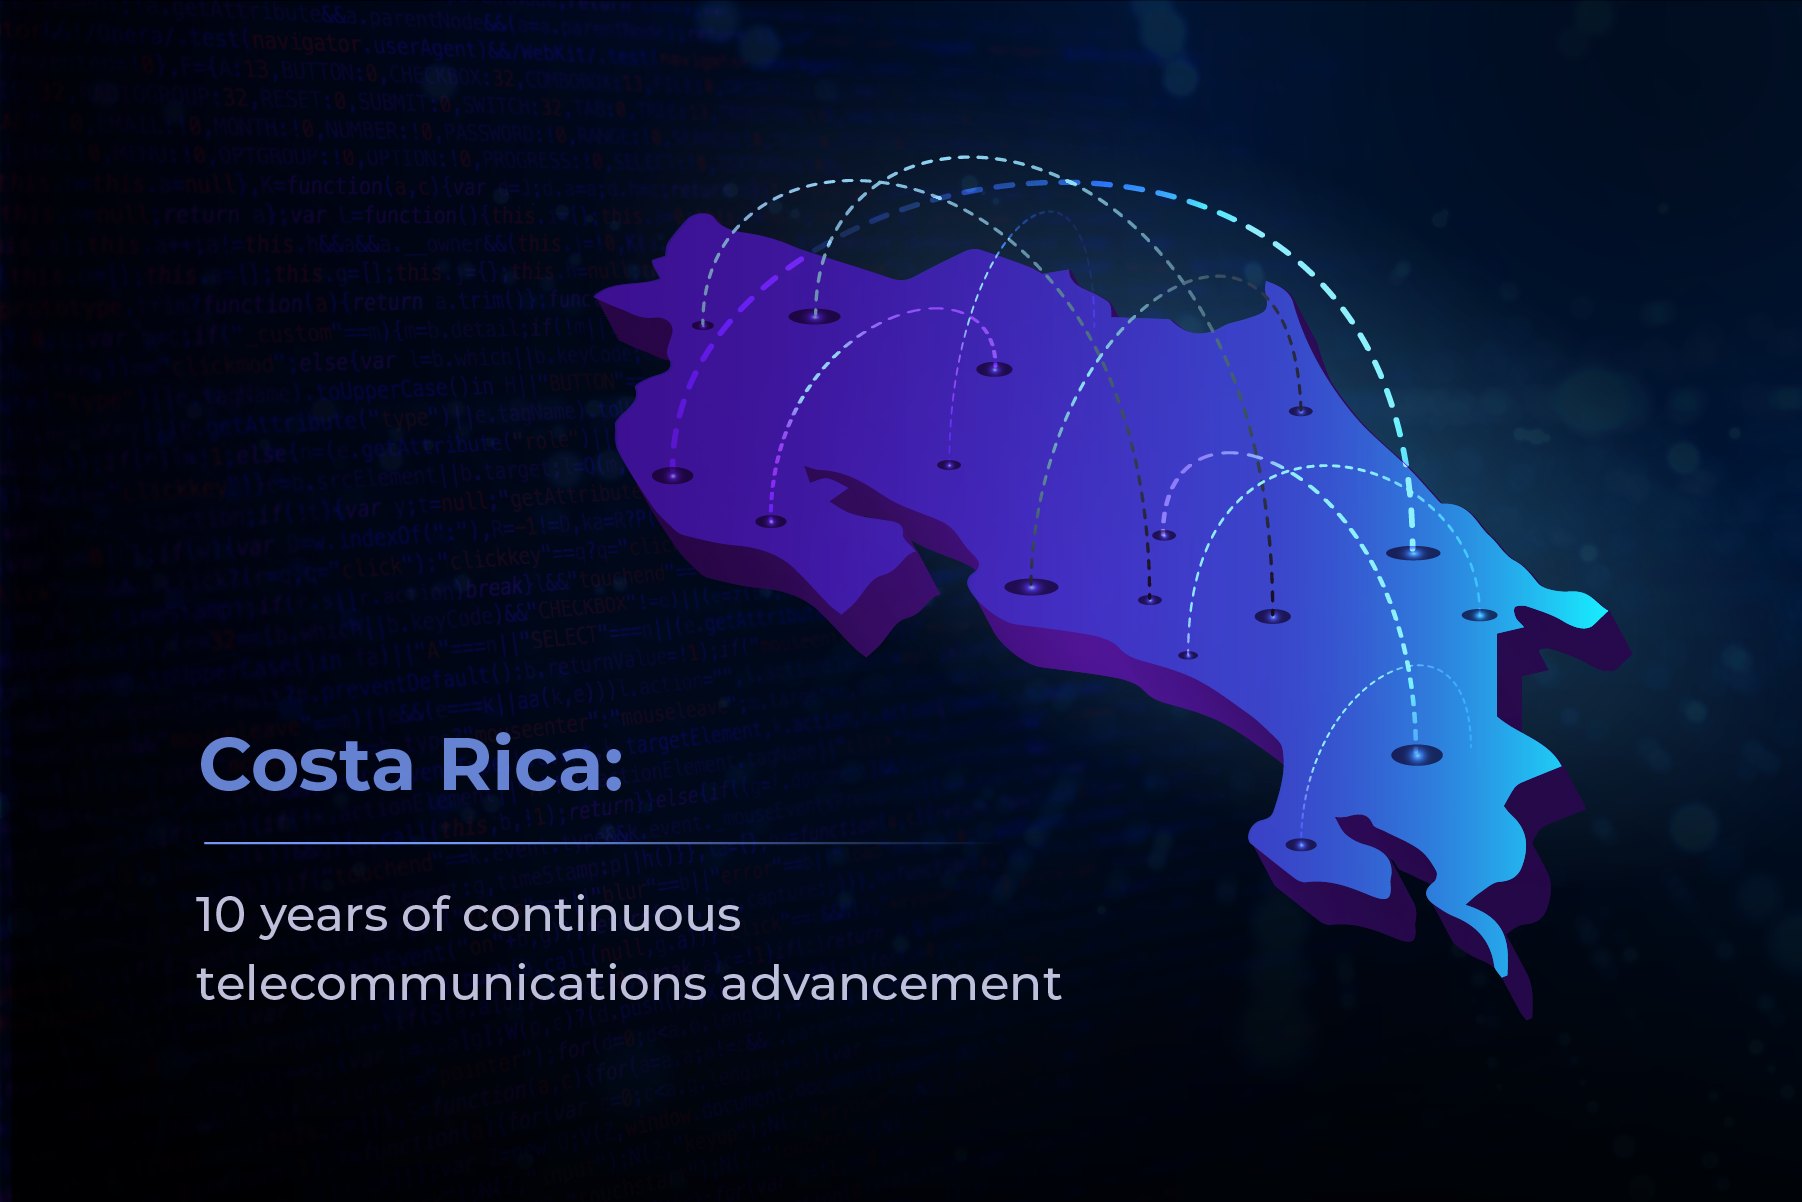 Costa Rica: 10 Years Of Continuous Telecommunications Advancement